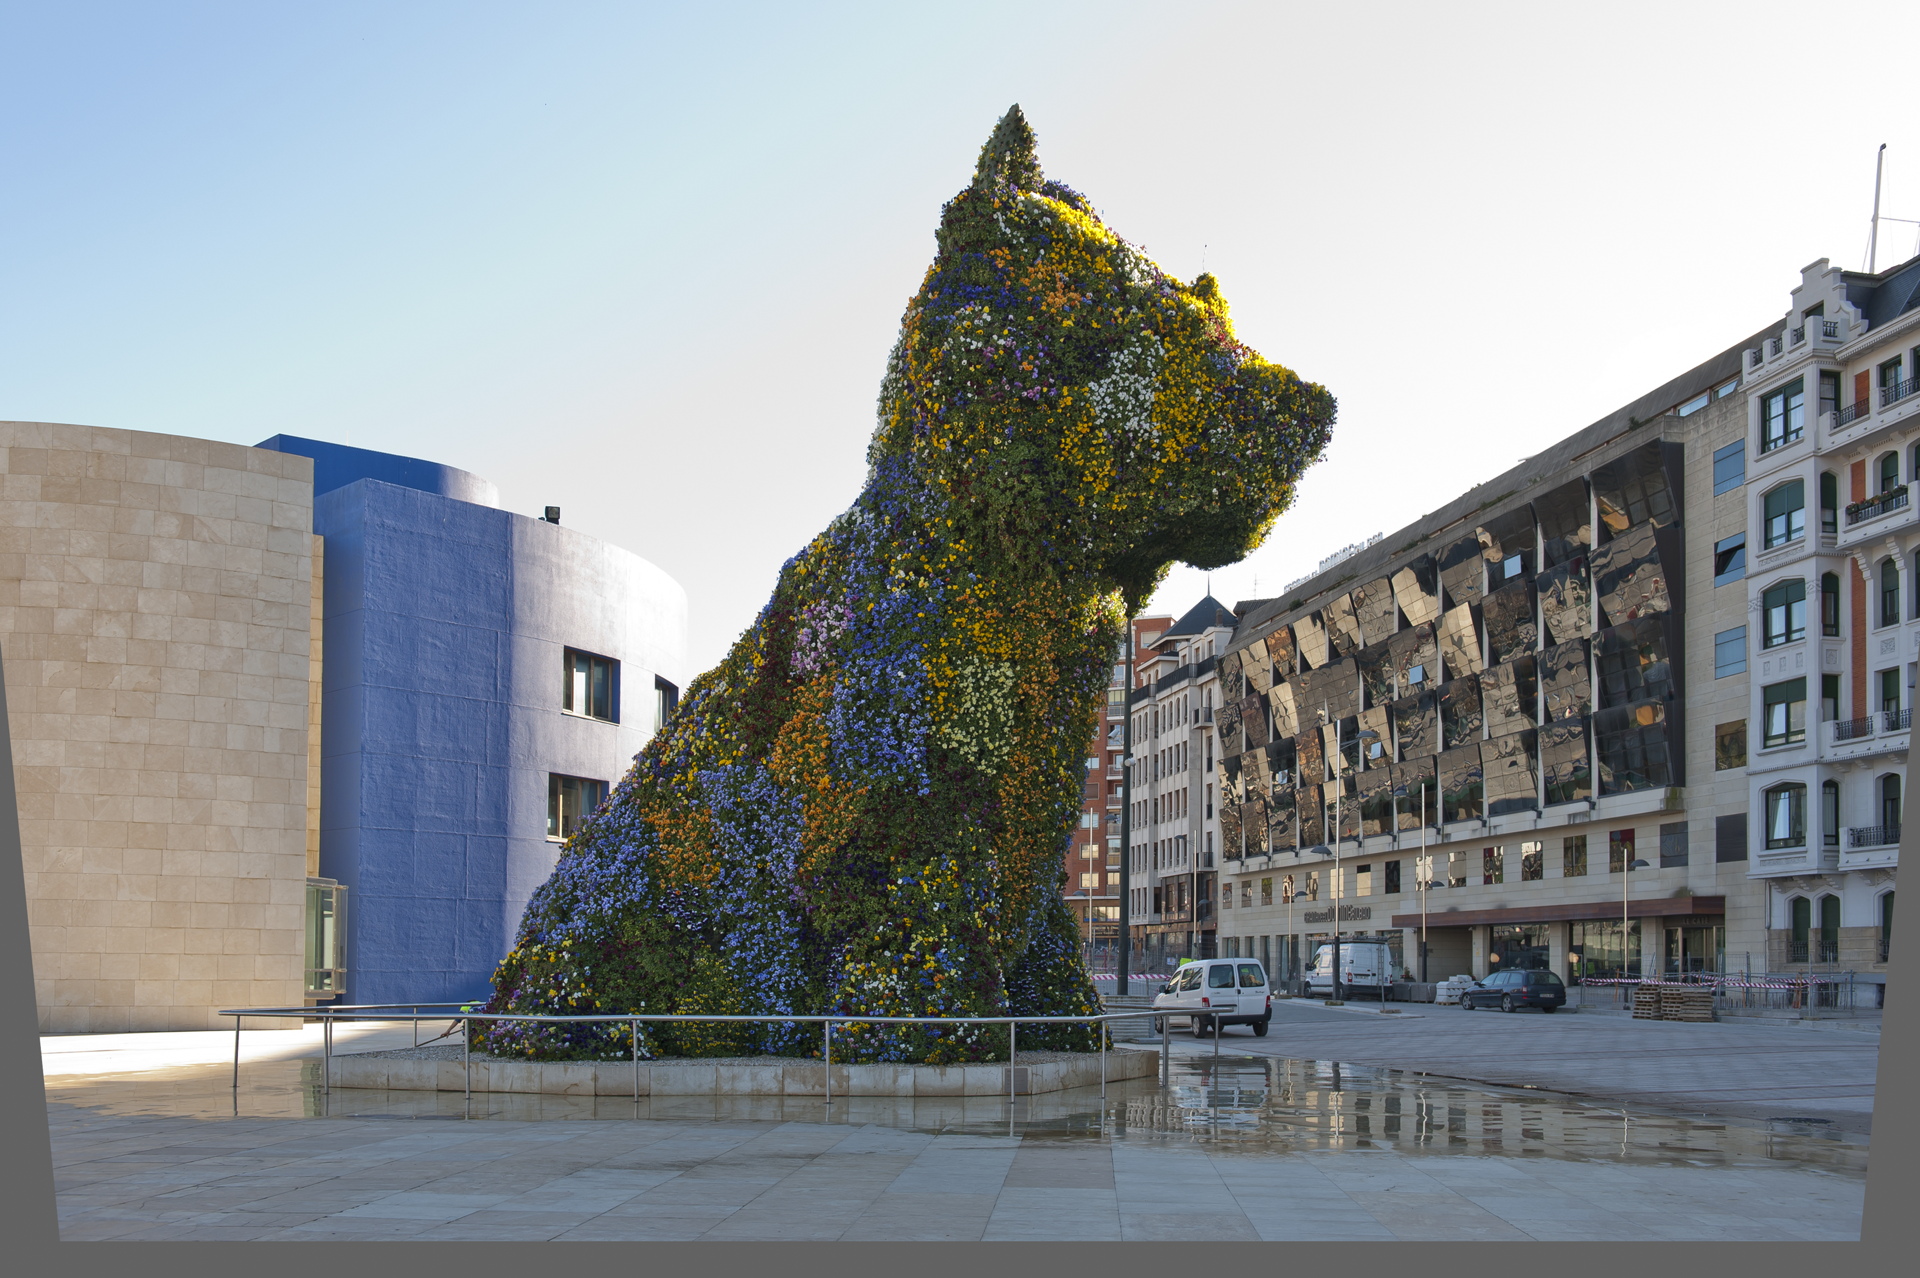 Guggenheim Bilbao great artworks to enjoy at the Museum